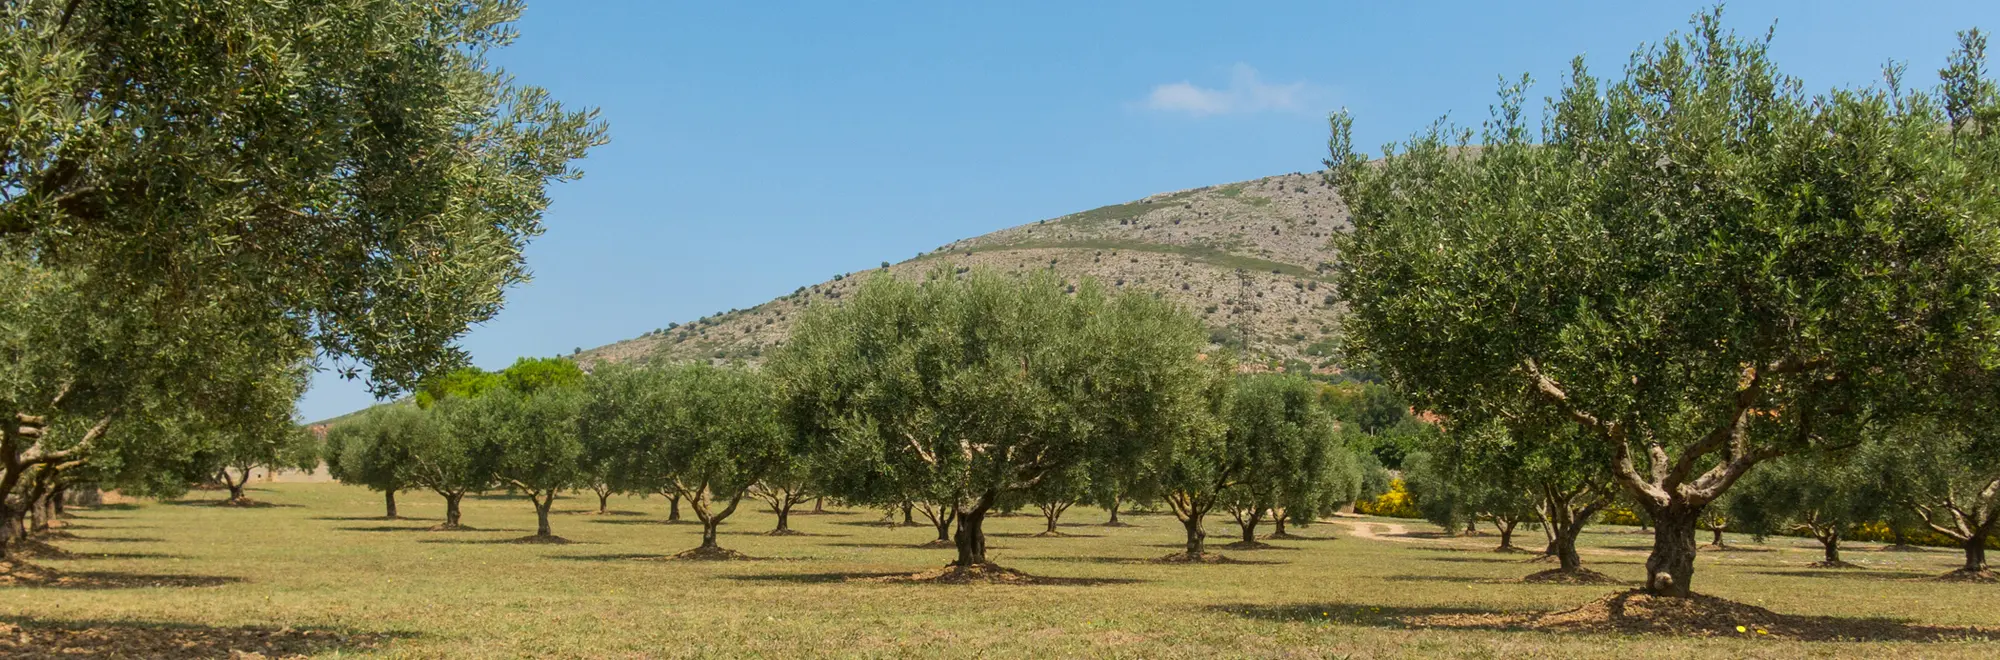 How big can olive trees grow?